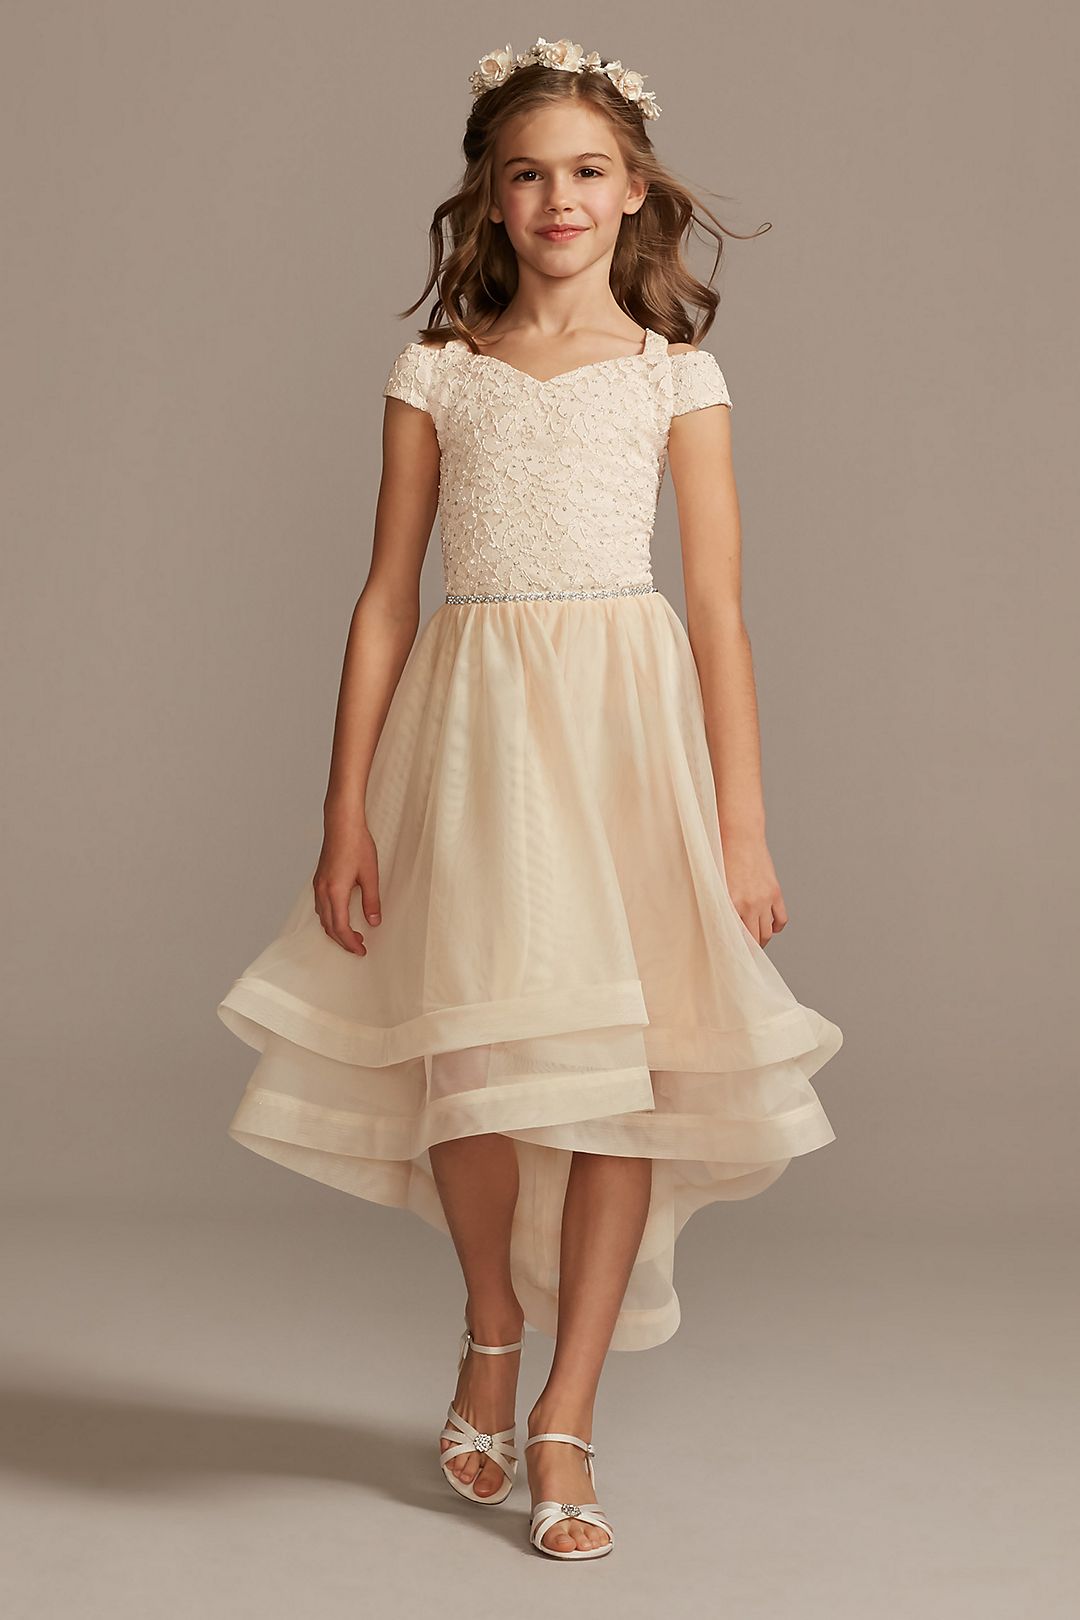 Off-the-Shoulder Lace and Tulle Flower Girl Dress Image 3